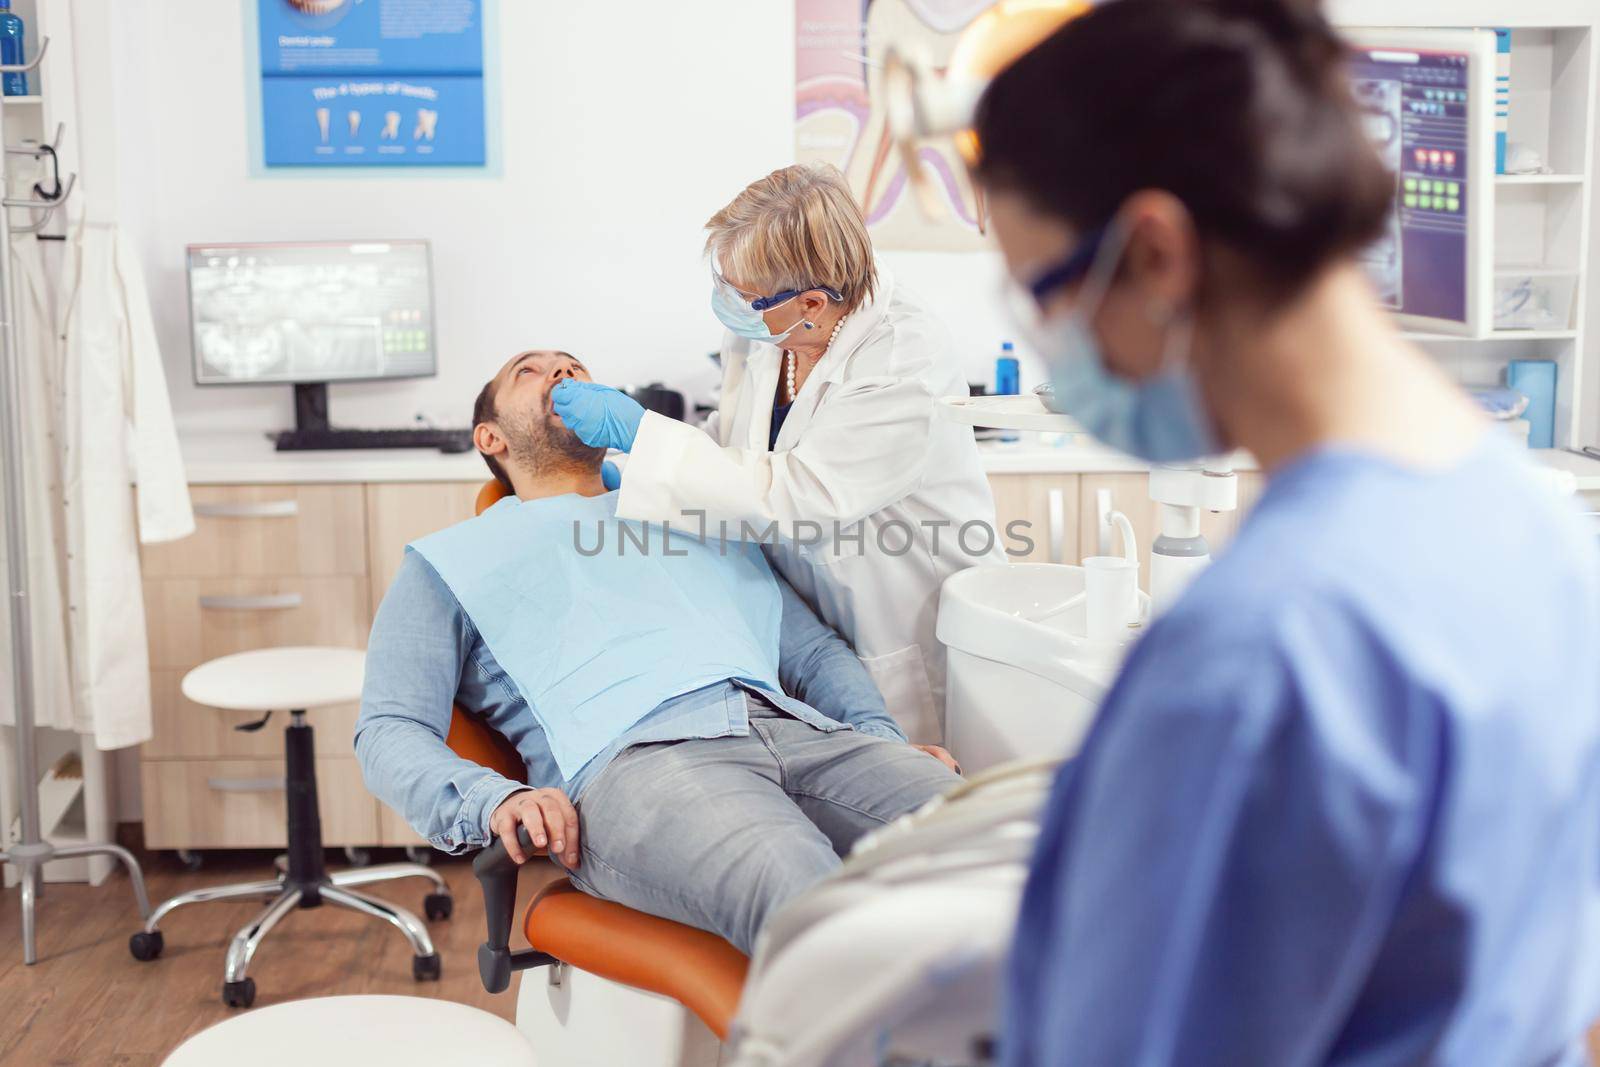 Sick man lying in stomatology chair with open mouth for medical exemination, in orthodontic clinic. Nurse preparing tools for oral problems working in stomatological hospital